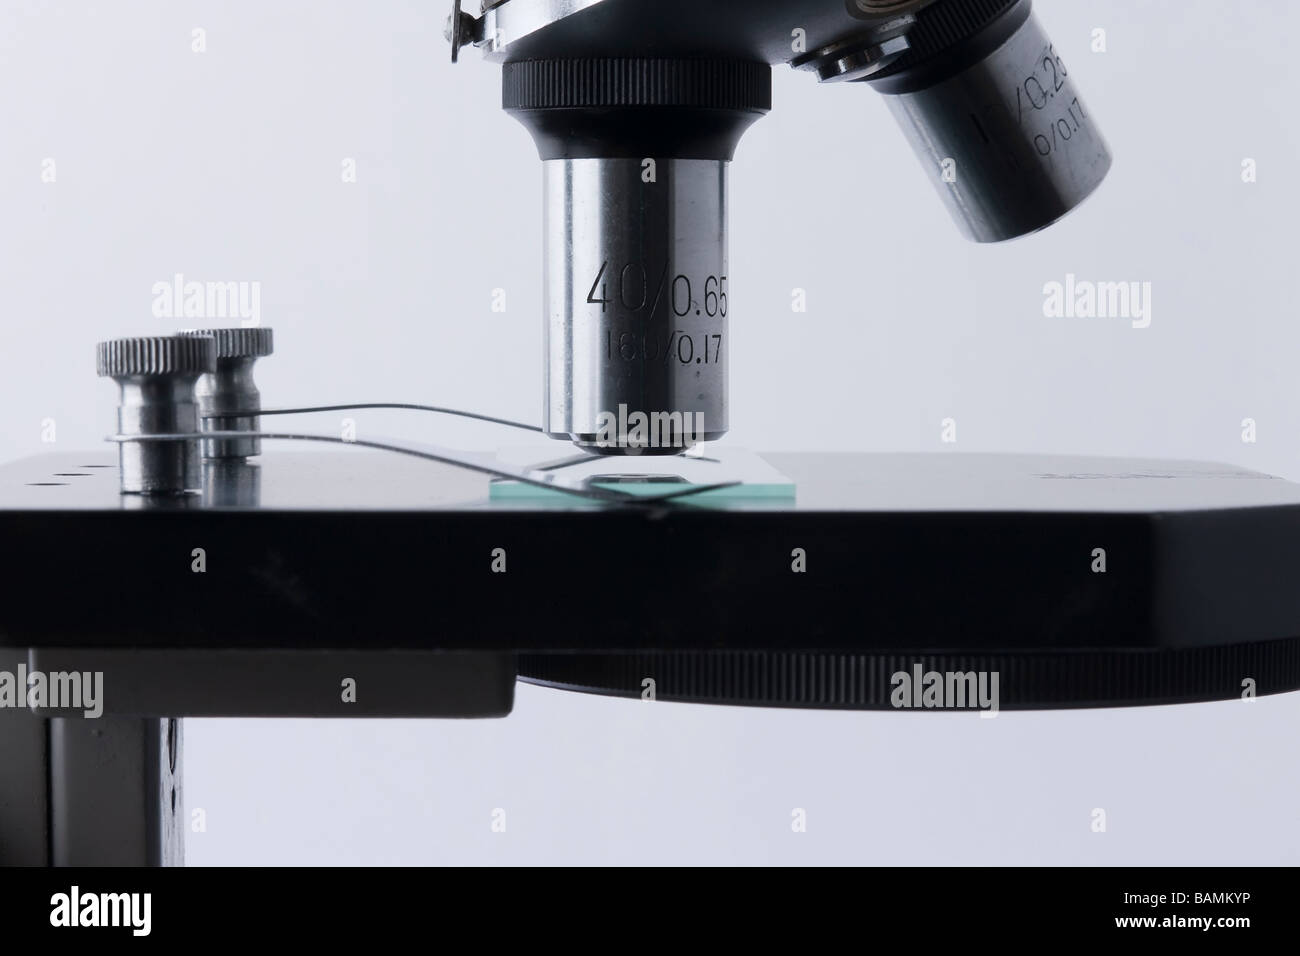 Side detail view of microscope showing objective lenses, specimen slide and retaining clips. Stock Photo